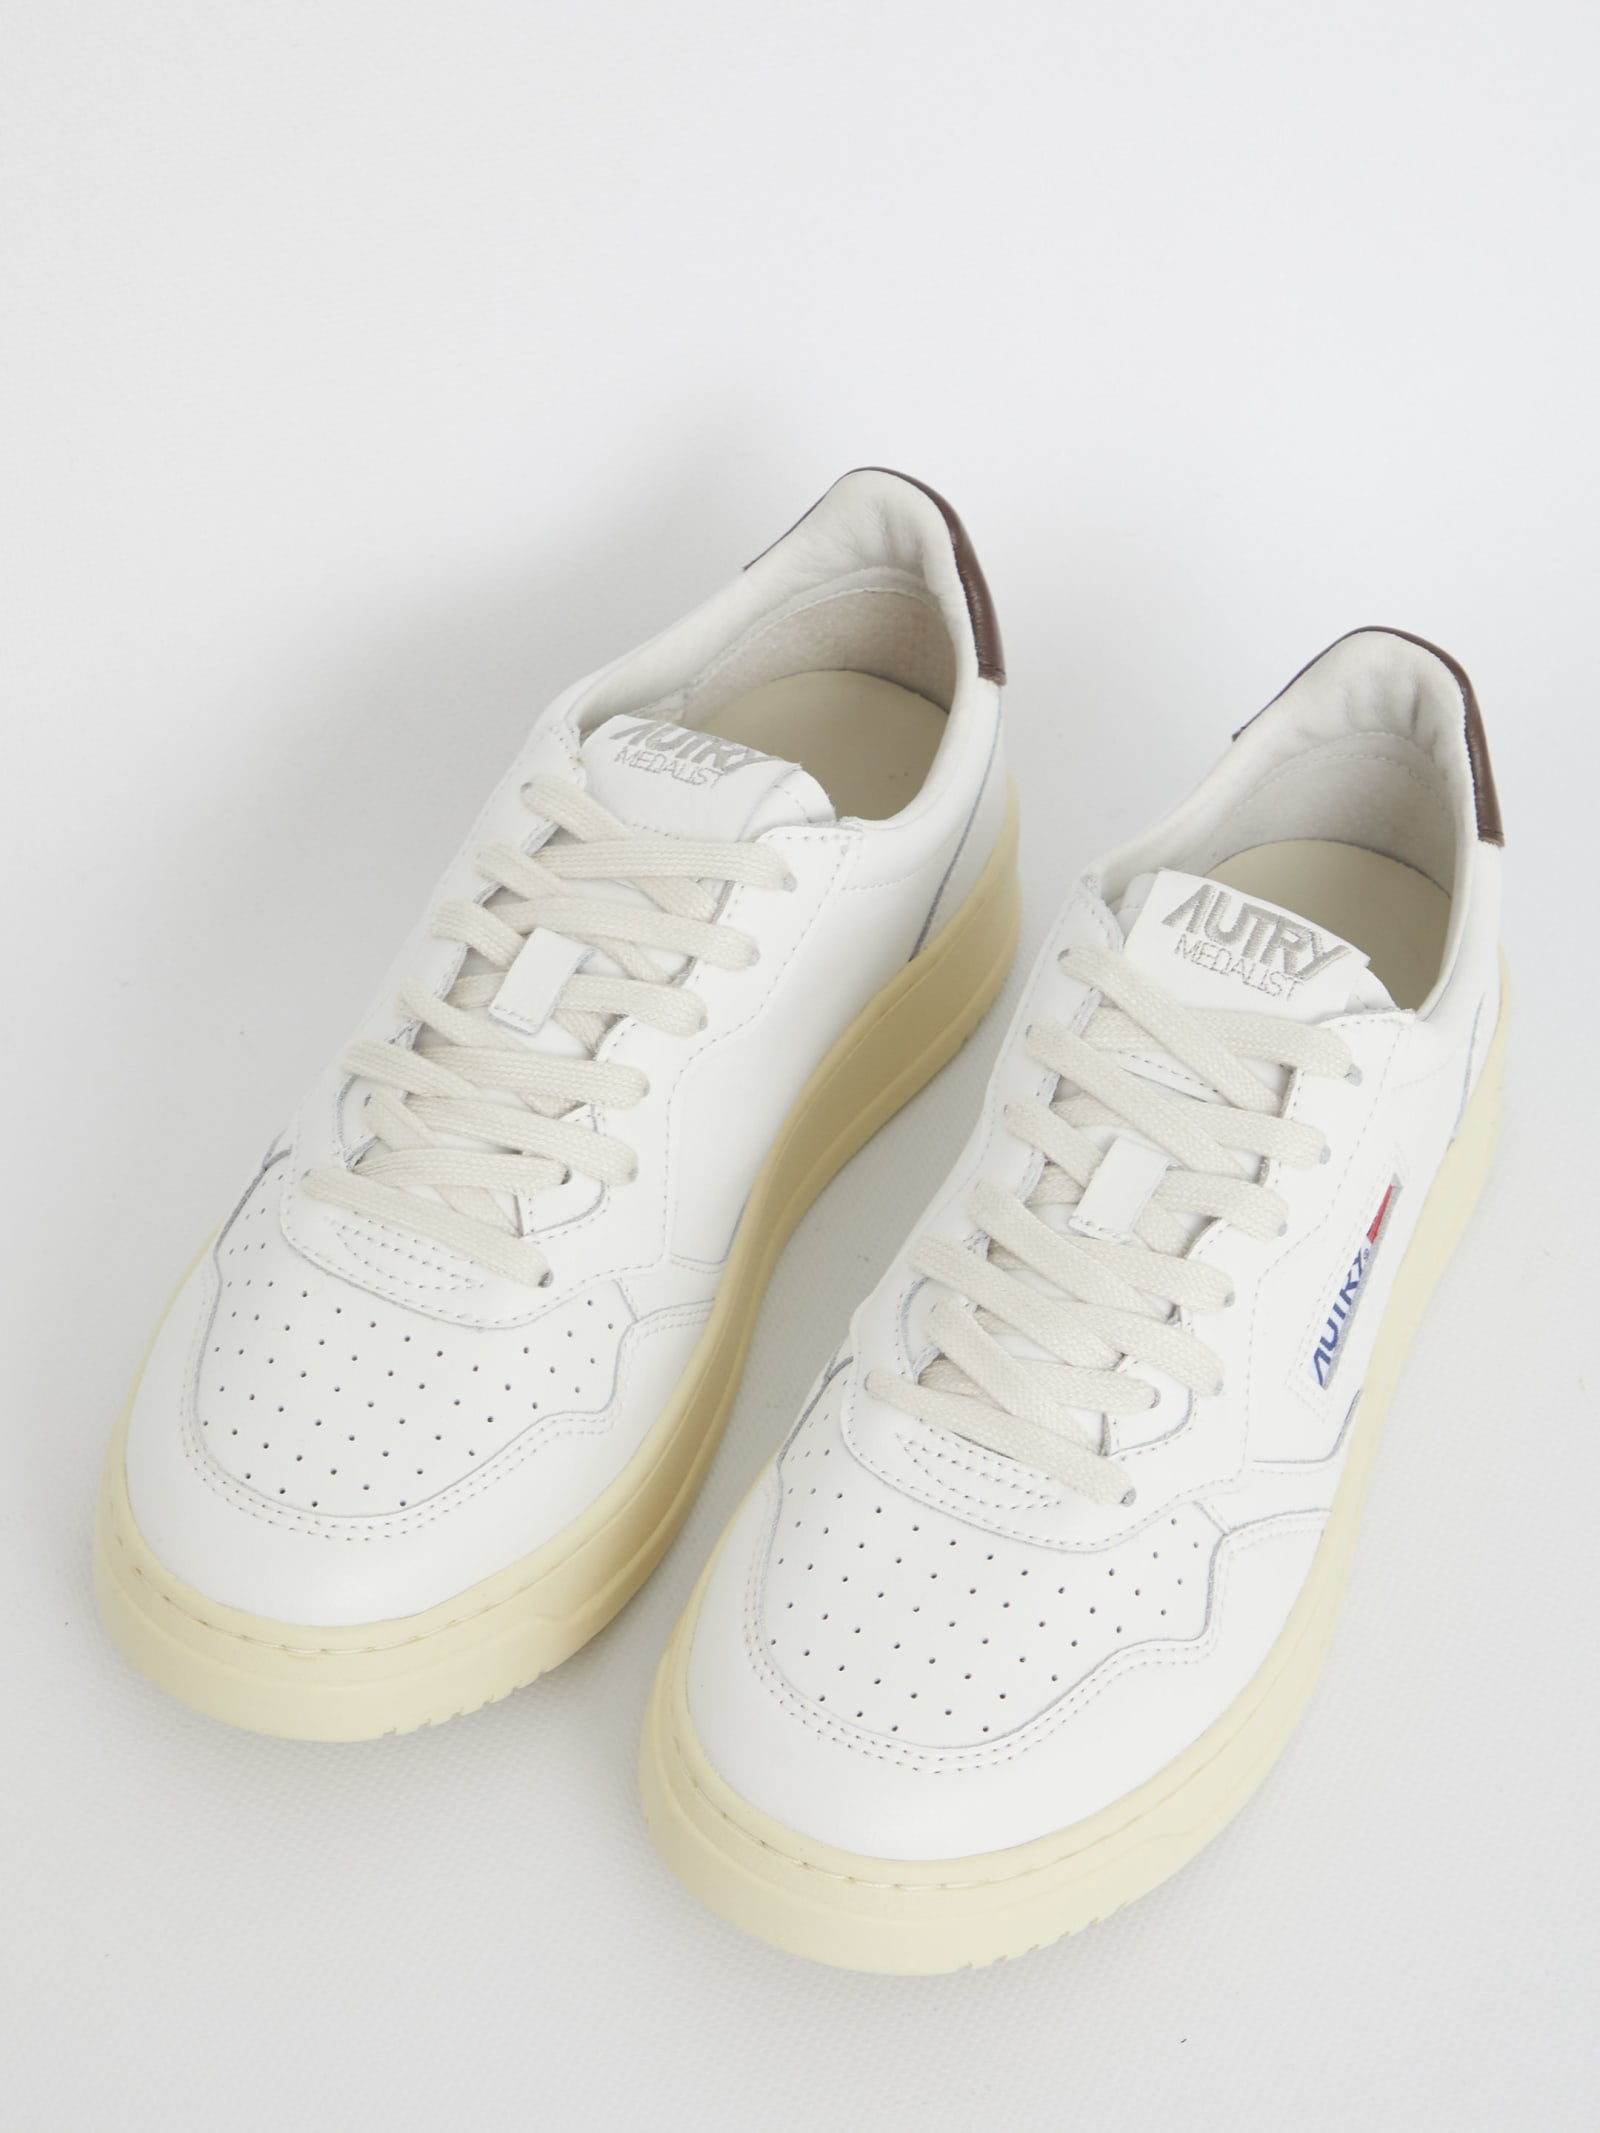 Shop Autry Medalist White And Brown Sneakers In Bianco